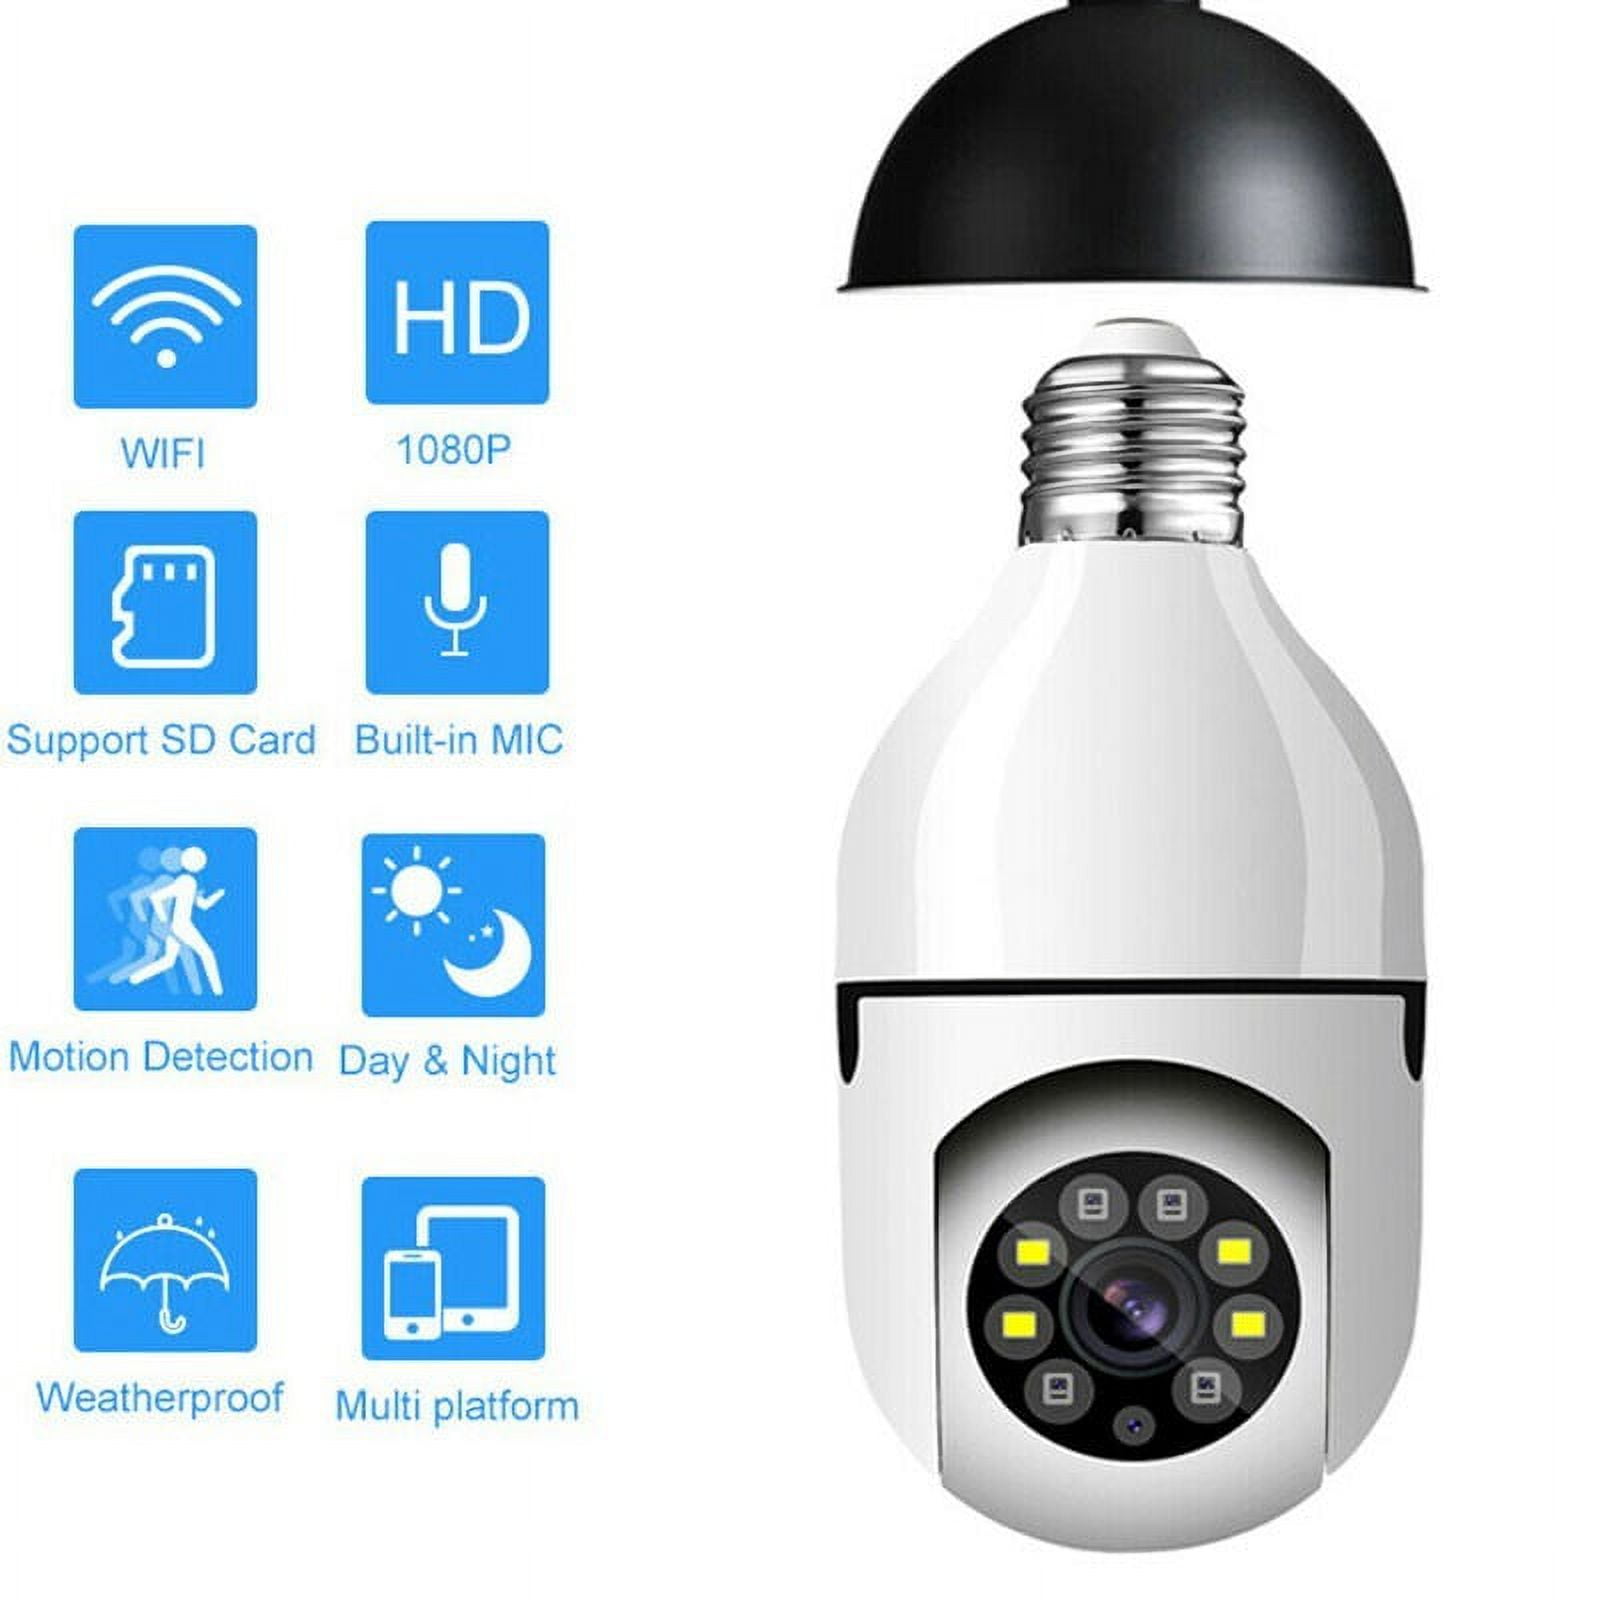 Safetynet 4K HD WiFi CAM PRO1080p Night Vision Holder Camera WiFi Wireless Spy  Cam Mini Bulb Holder Best Security Camera with Video Recording & HD Voice  Quality. Security Camera Price in India 